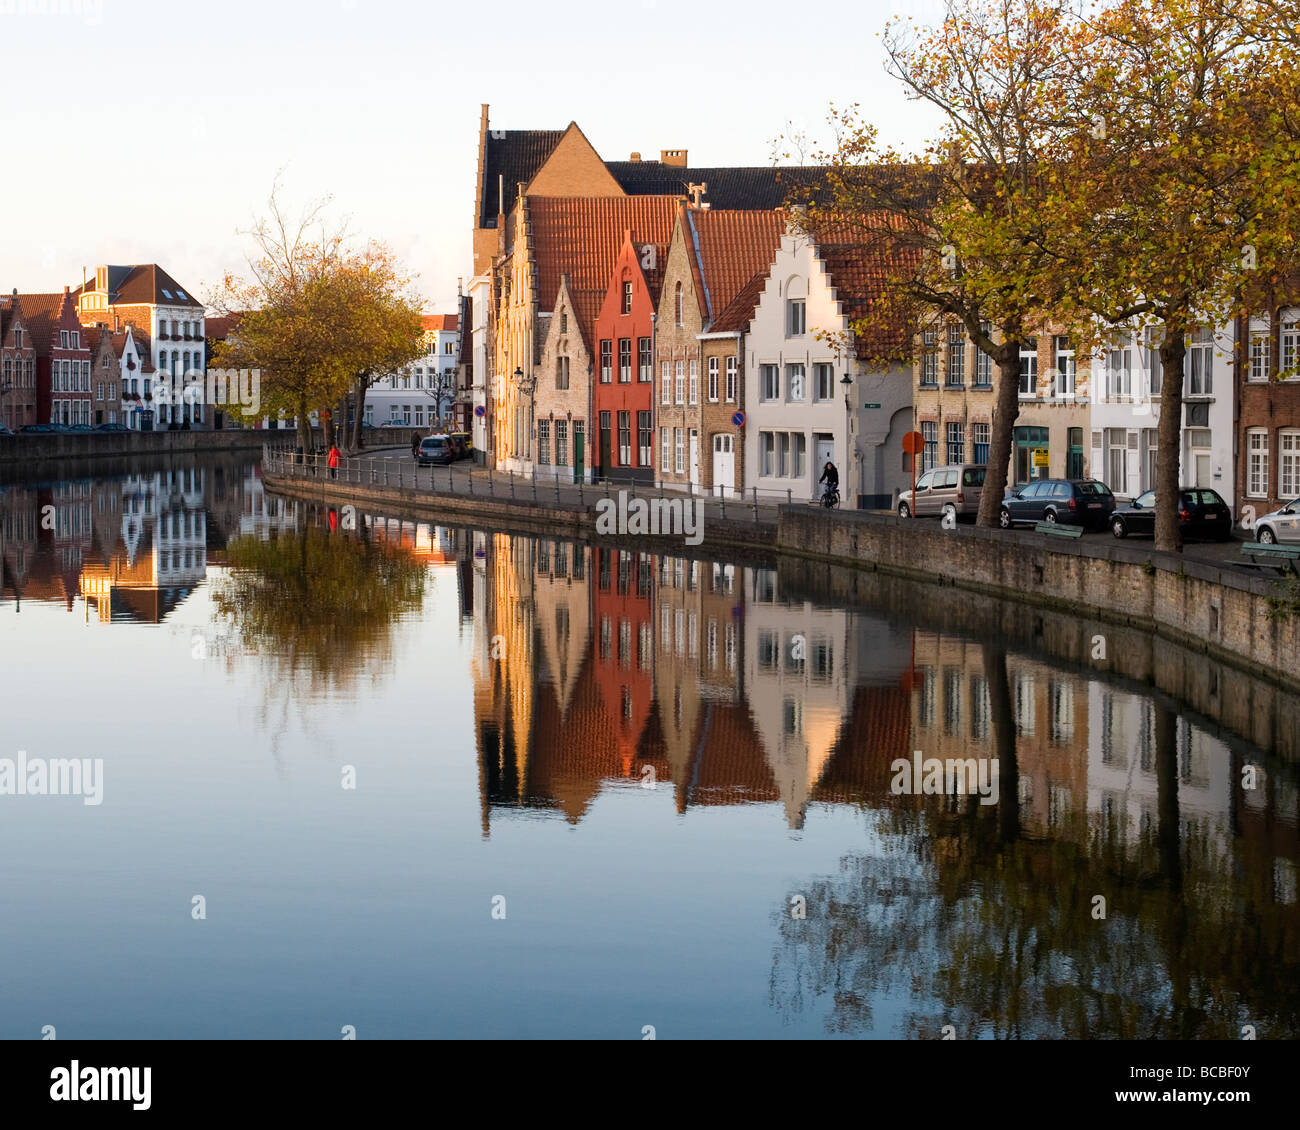 Canal and Potterierei, Bruges, Belgium. Stock Photo